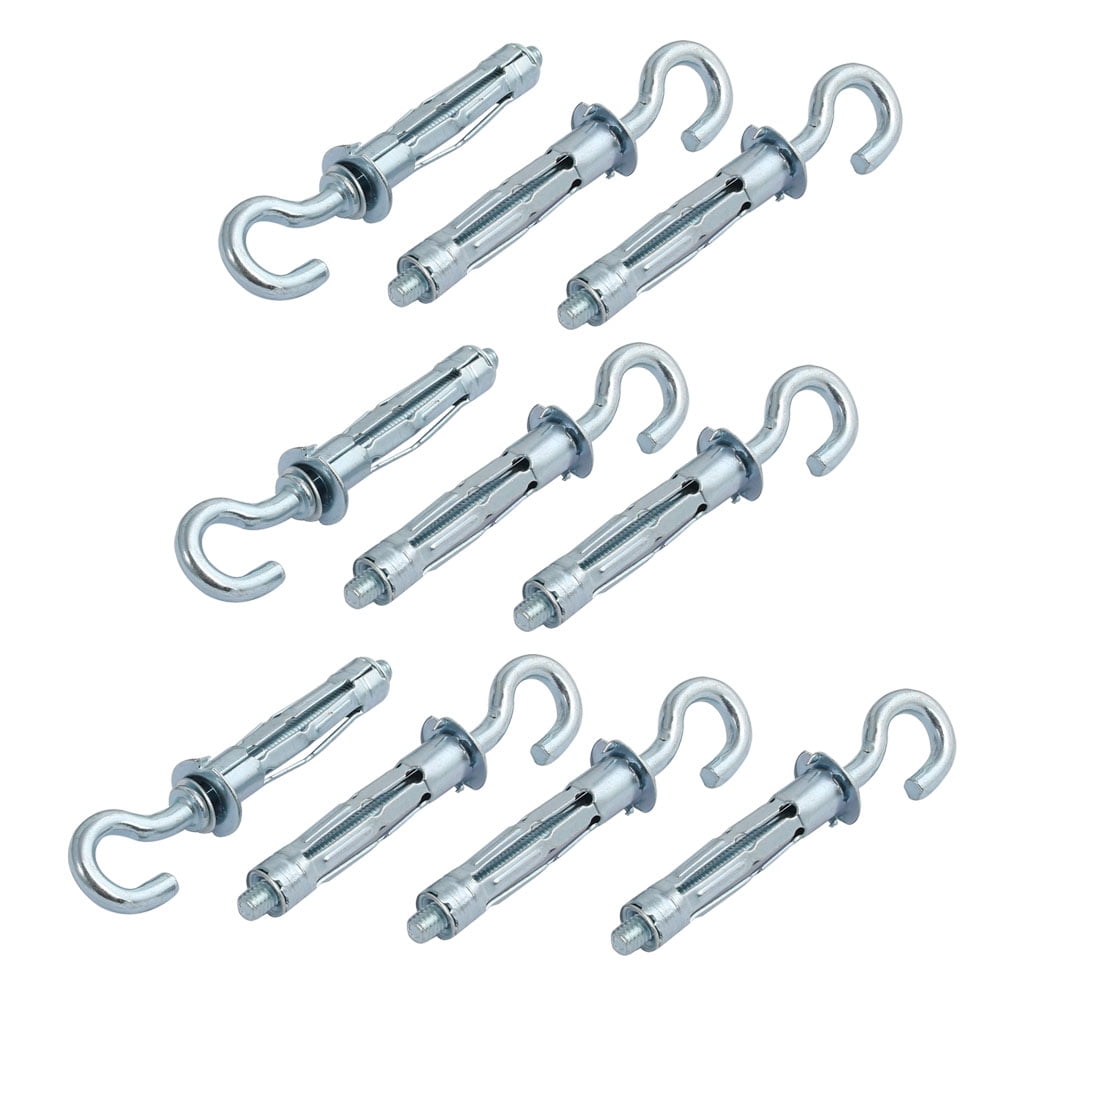 Metal Expanding Hollow Wall Anchor Screw in Silver 1.75 Inches Case of 12 